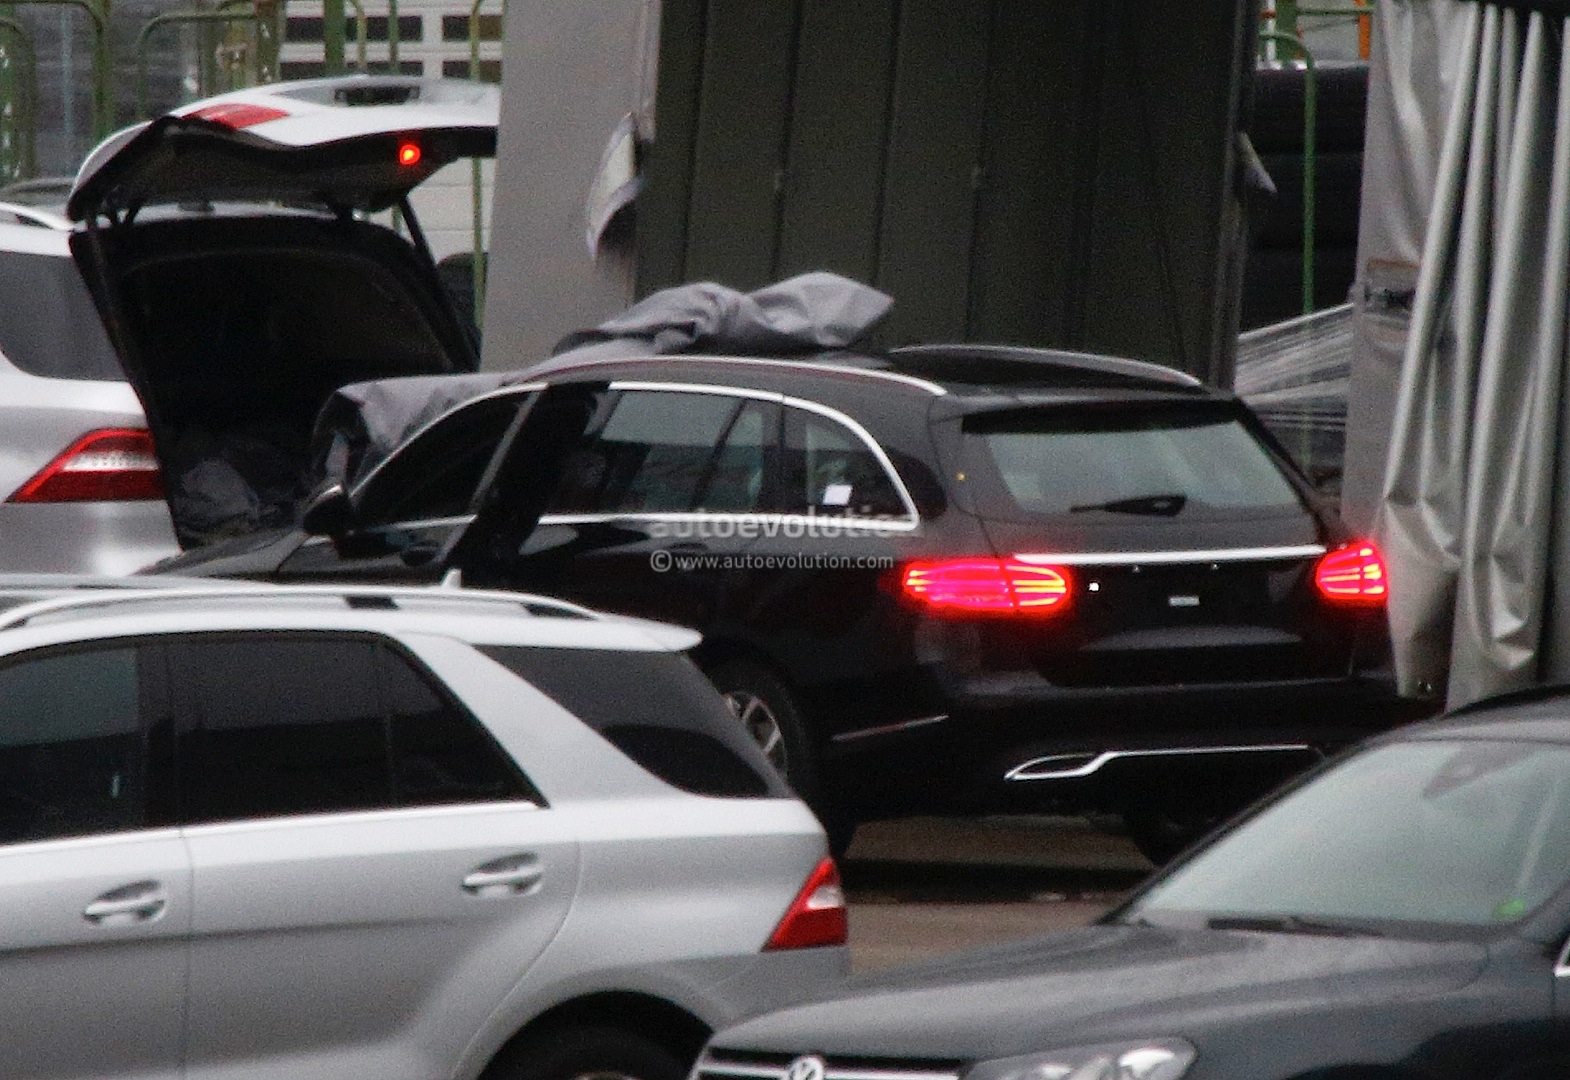 2014 - [Mercedes] Classe C [W205- S205] - Page 20 2015-c-class-wagon-s205-spied-completely-undisguised-photo-gallery-1080p-5